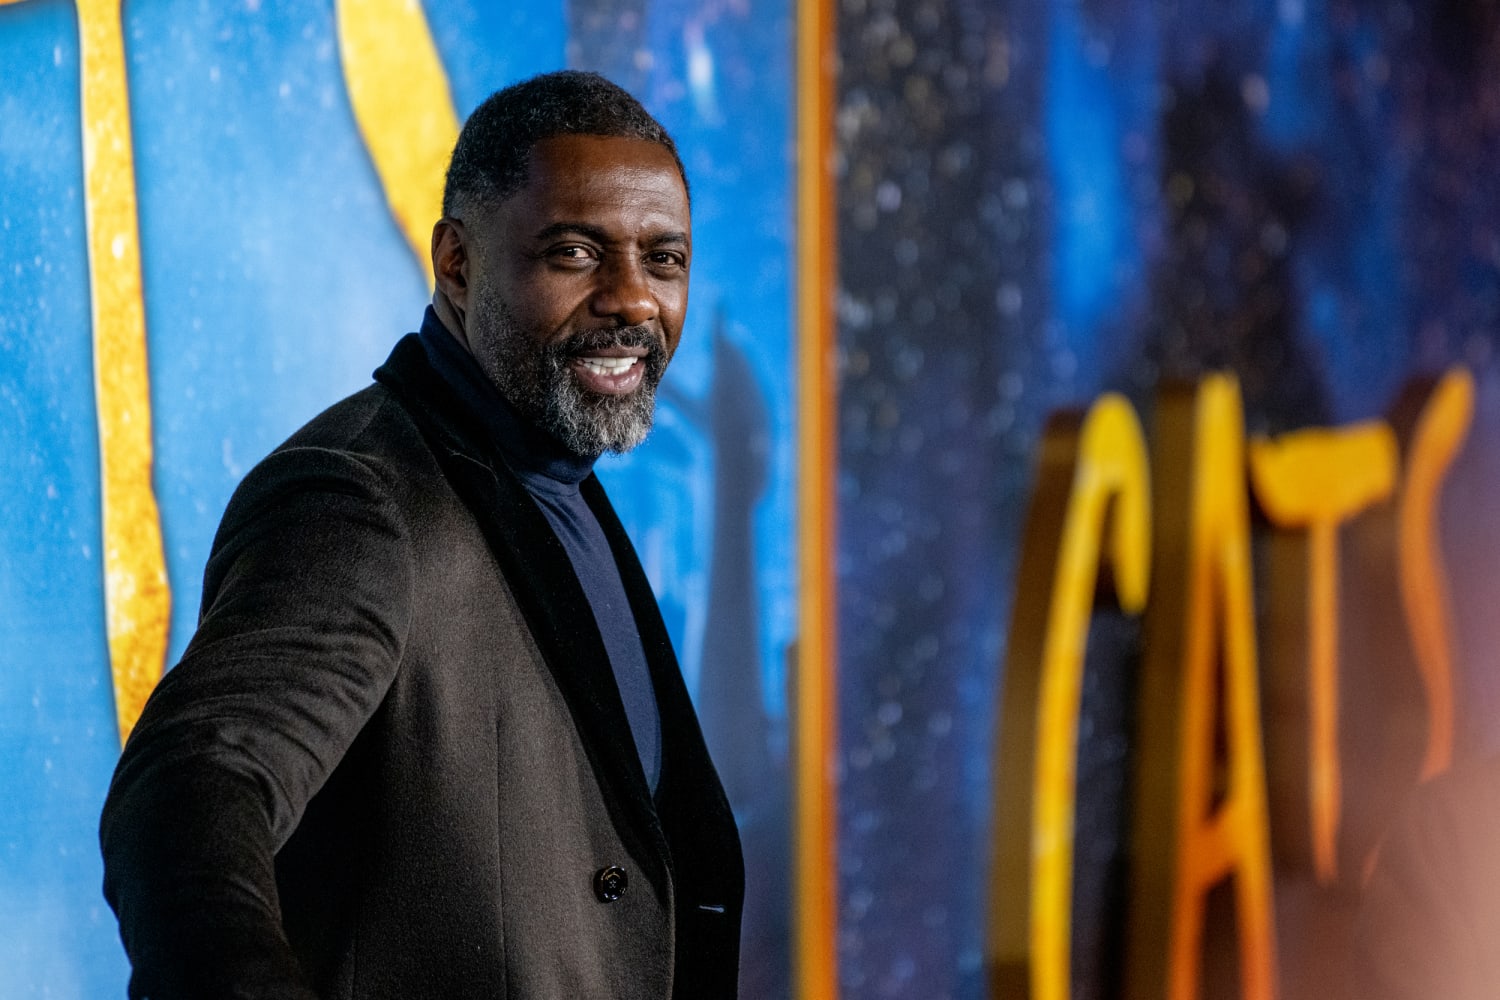 Netflix Inc: Idris Elba tests positive for coronavirus; asks fans to stay  at home and be pragmatic - The Economic Times